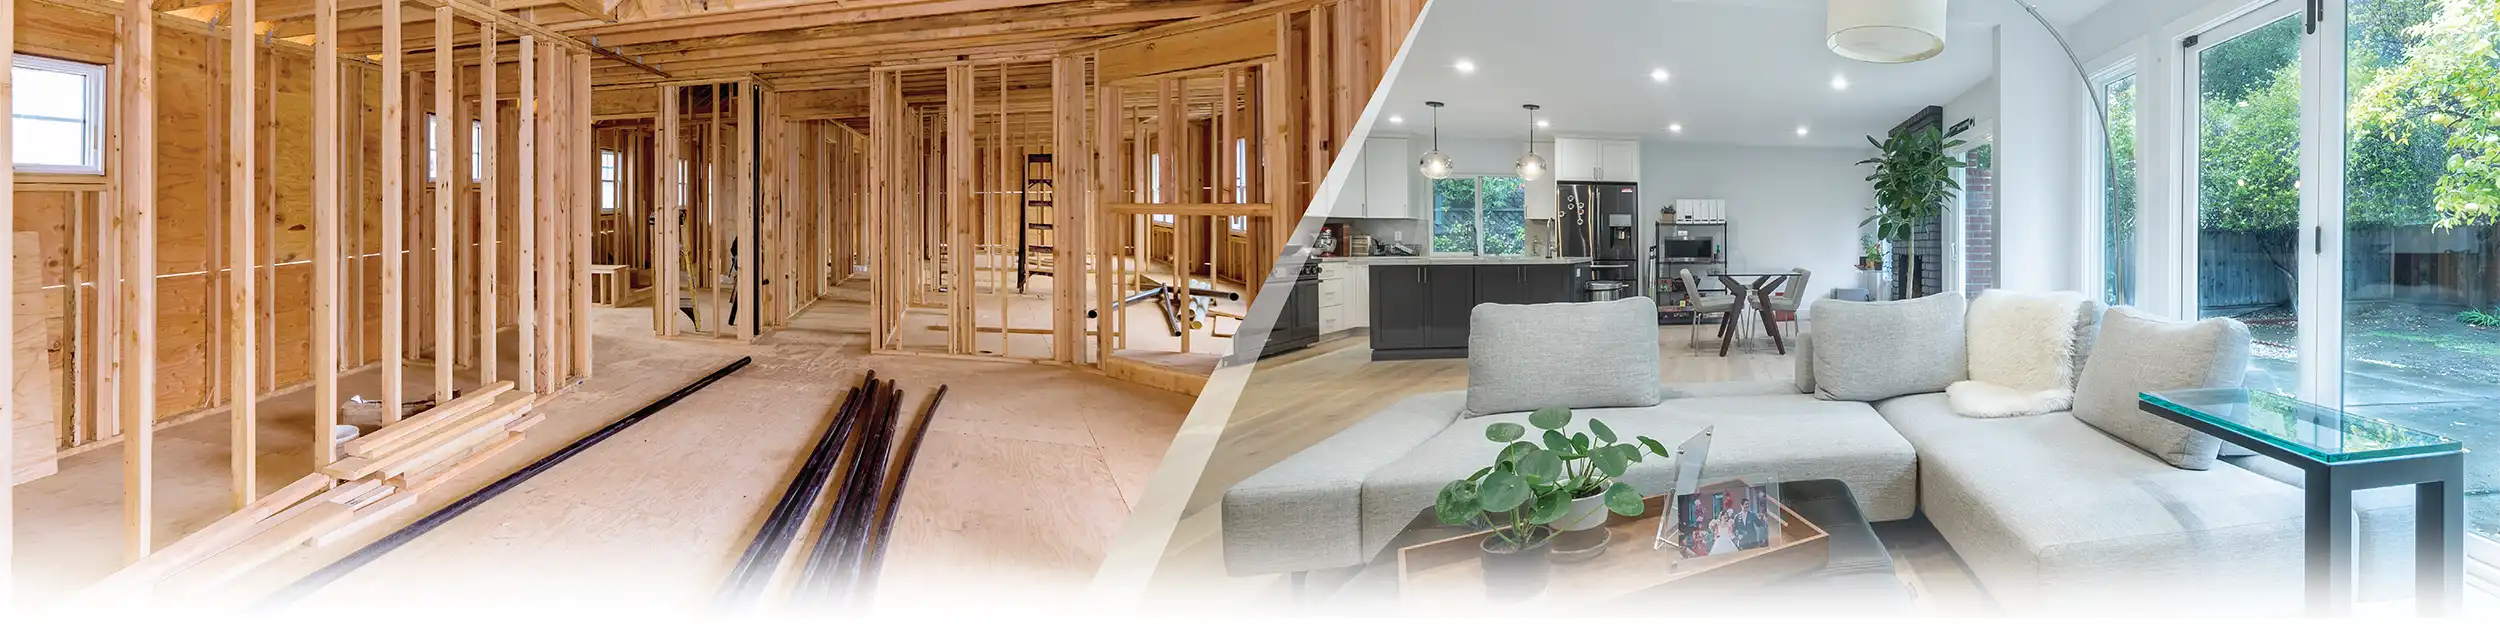 Complete Home Remodeling Contractor Services